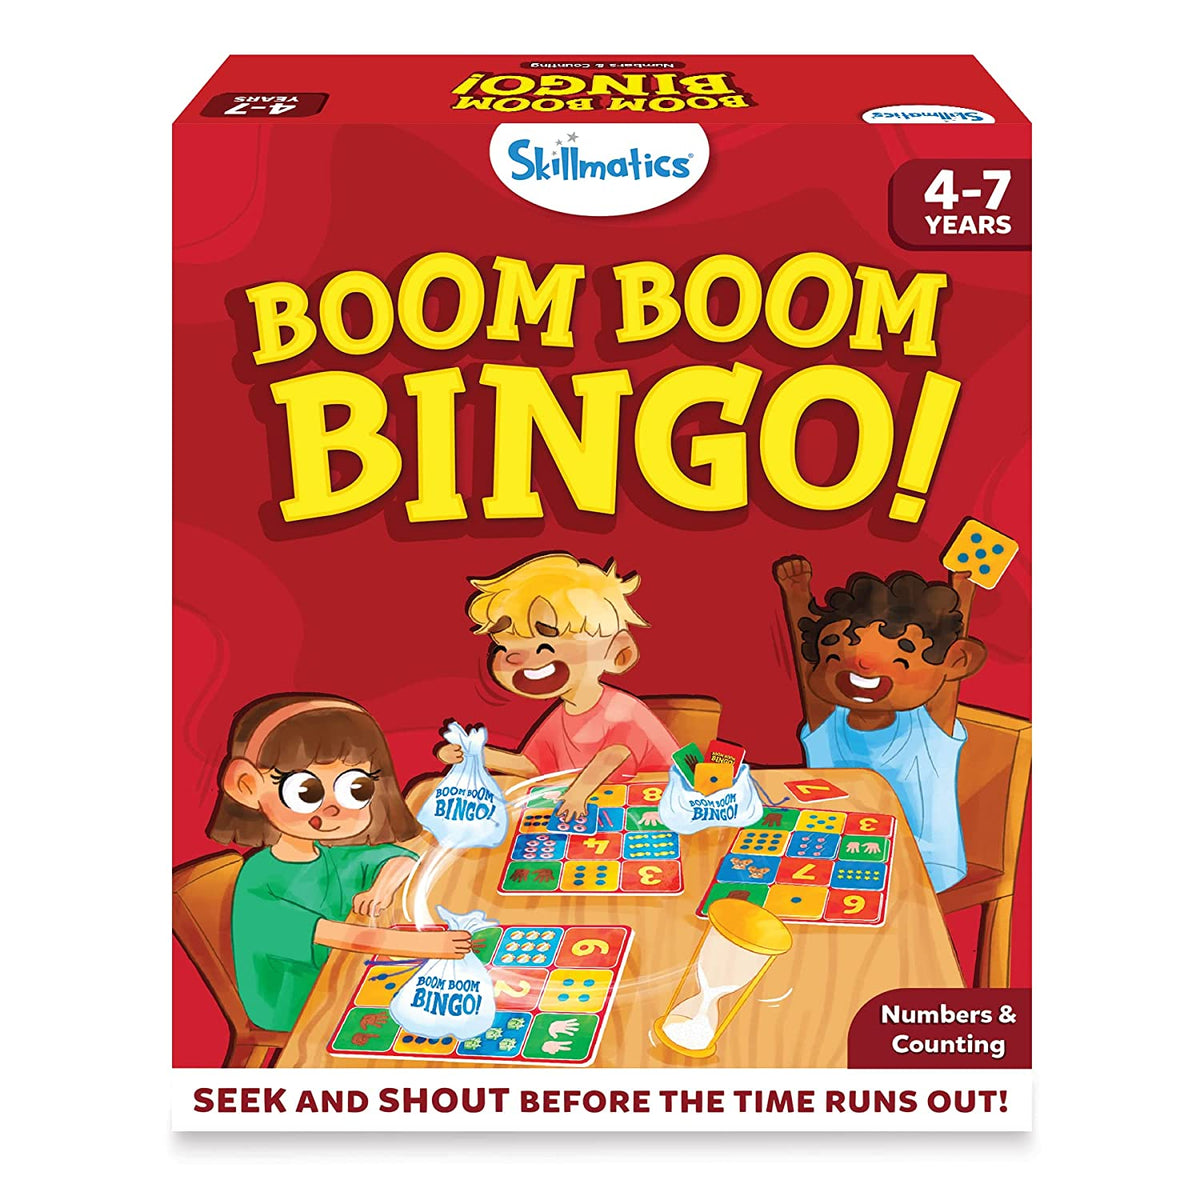 Skillmatics Boom Boom Bingo! Numbers & Counting - Board Game For Ages 4-7 Years